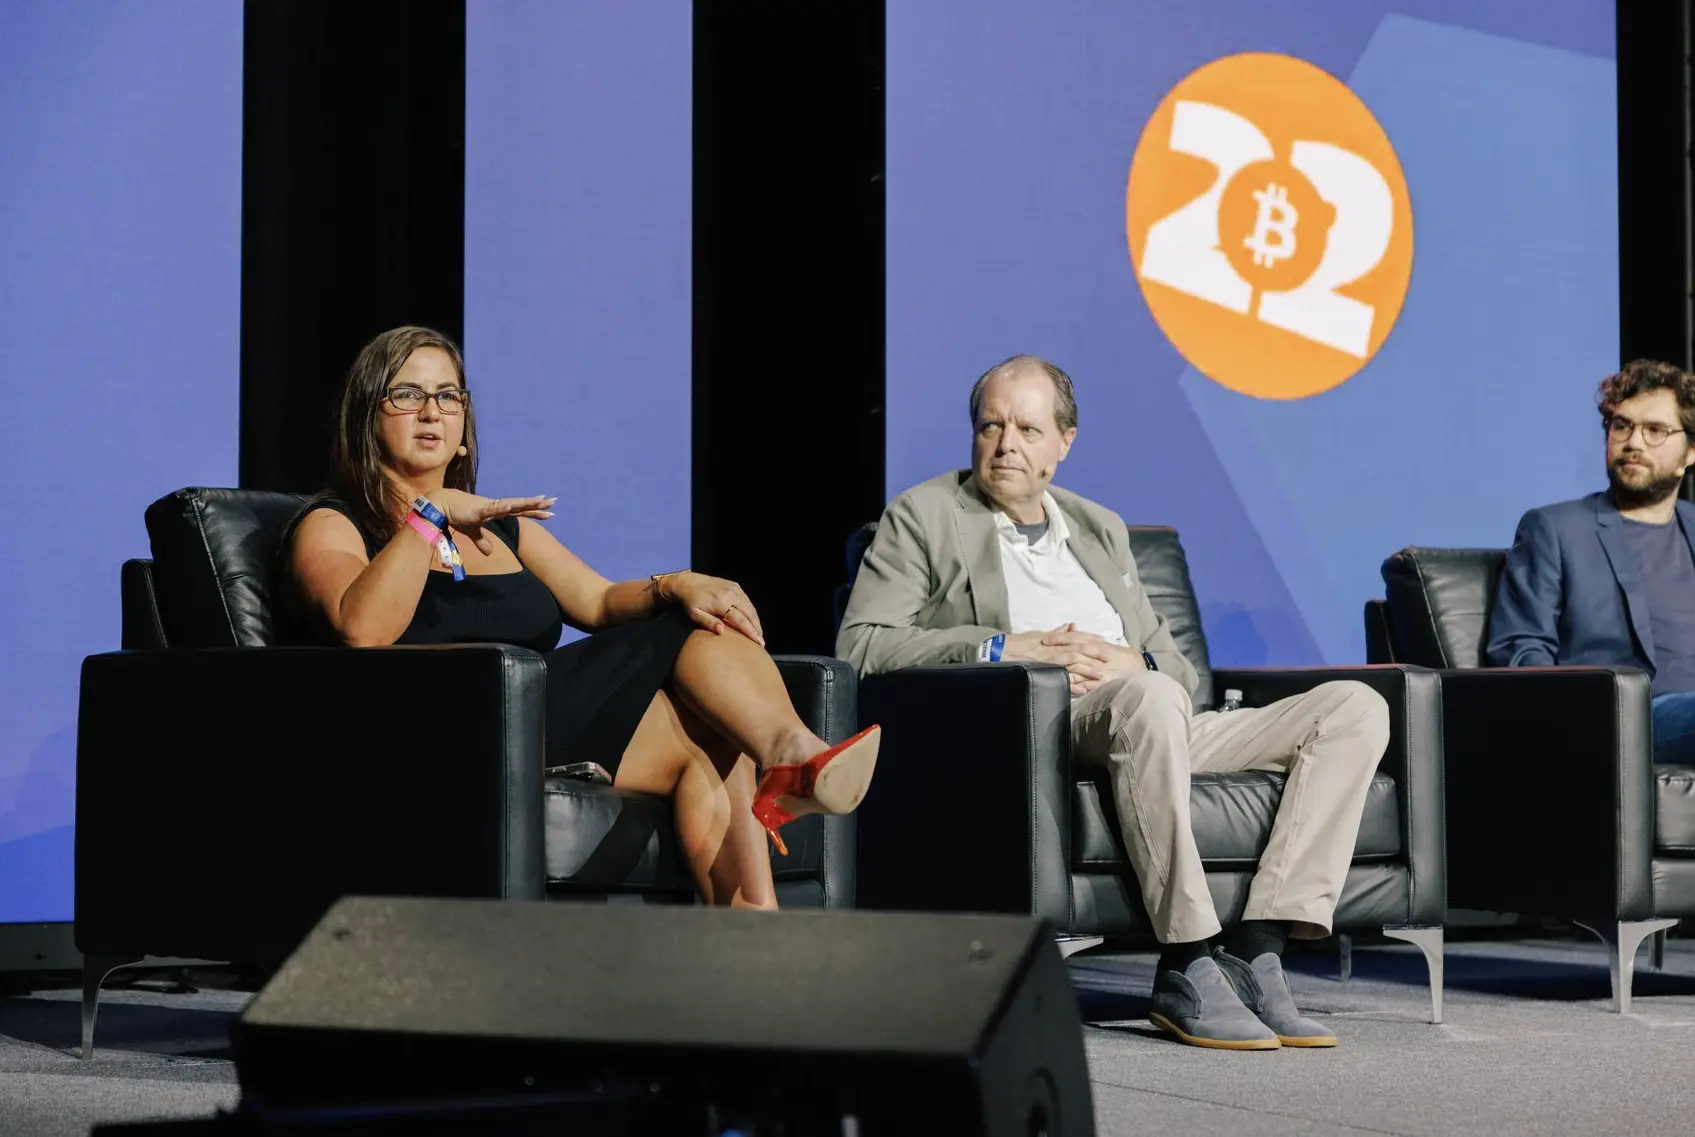 Panelists discussing compliance and regulation at the Bitcoin Miami 2022